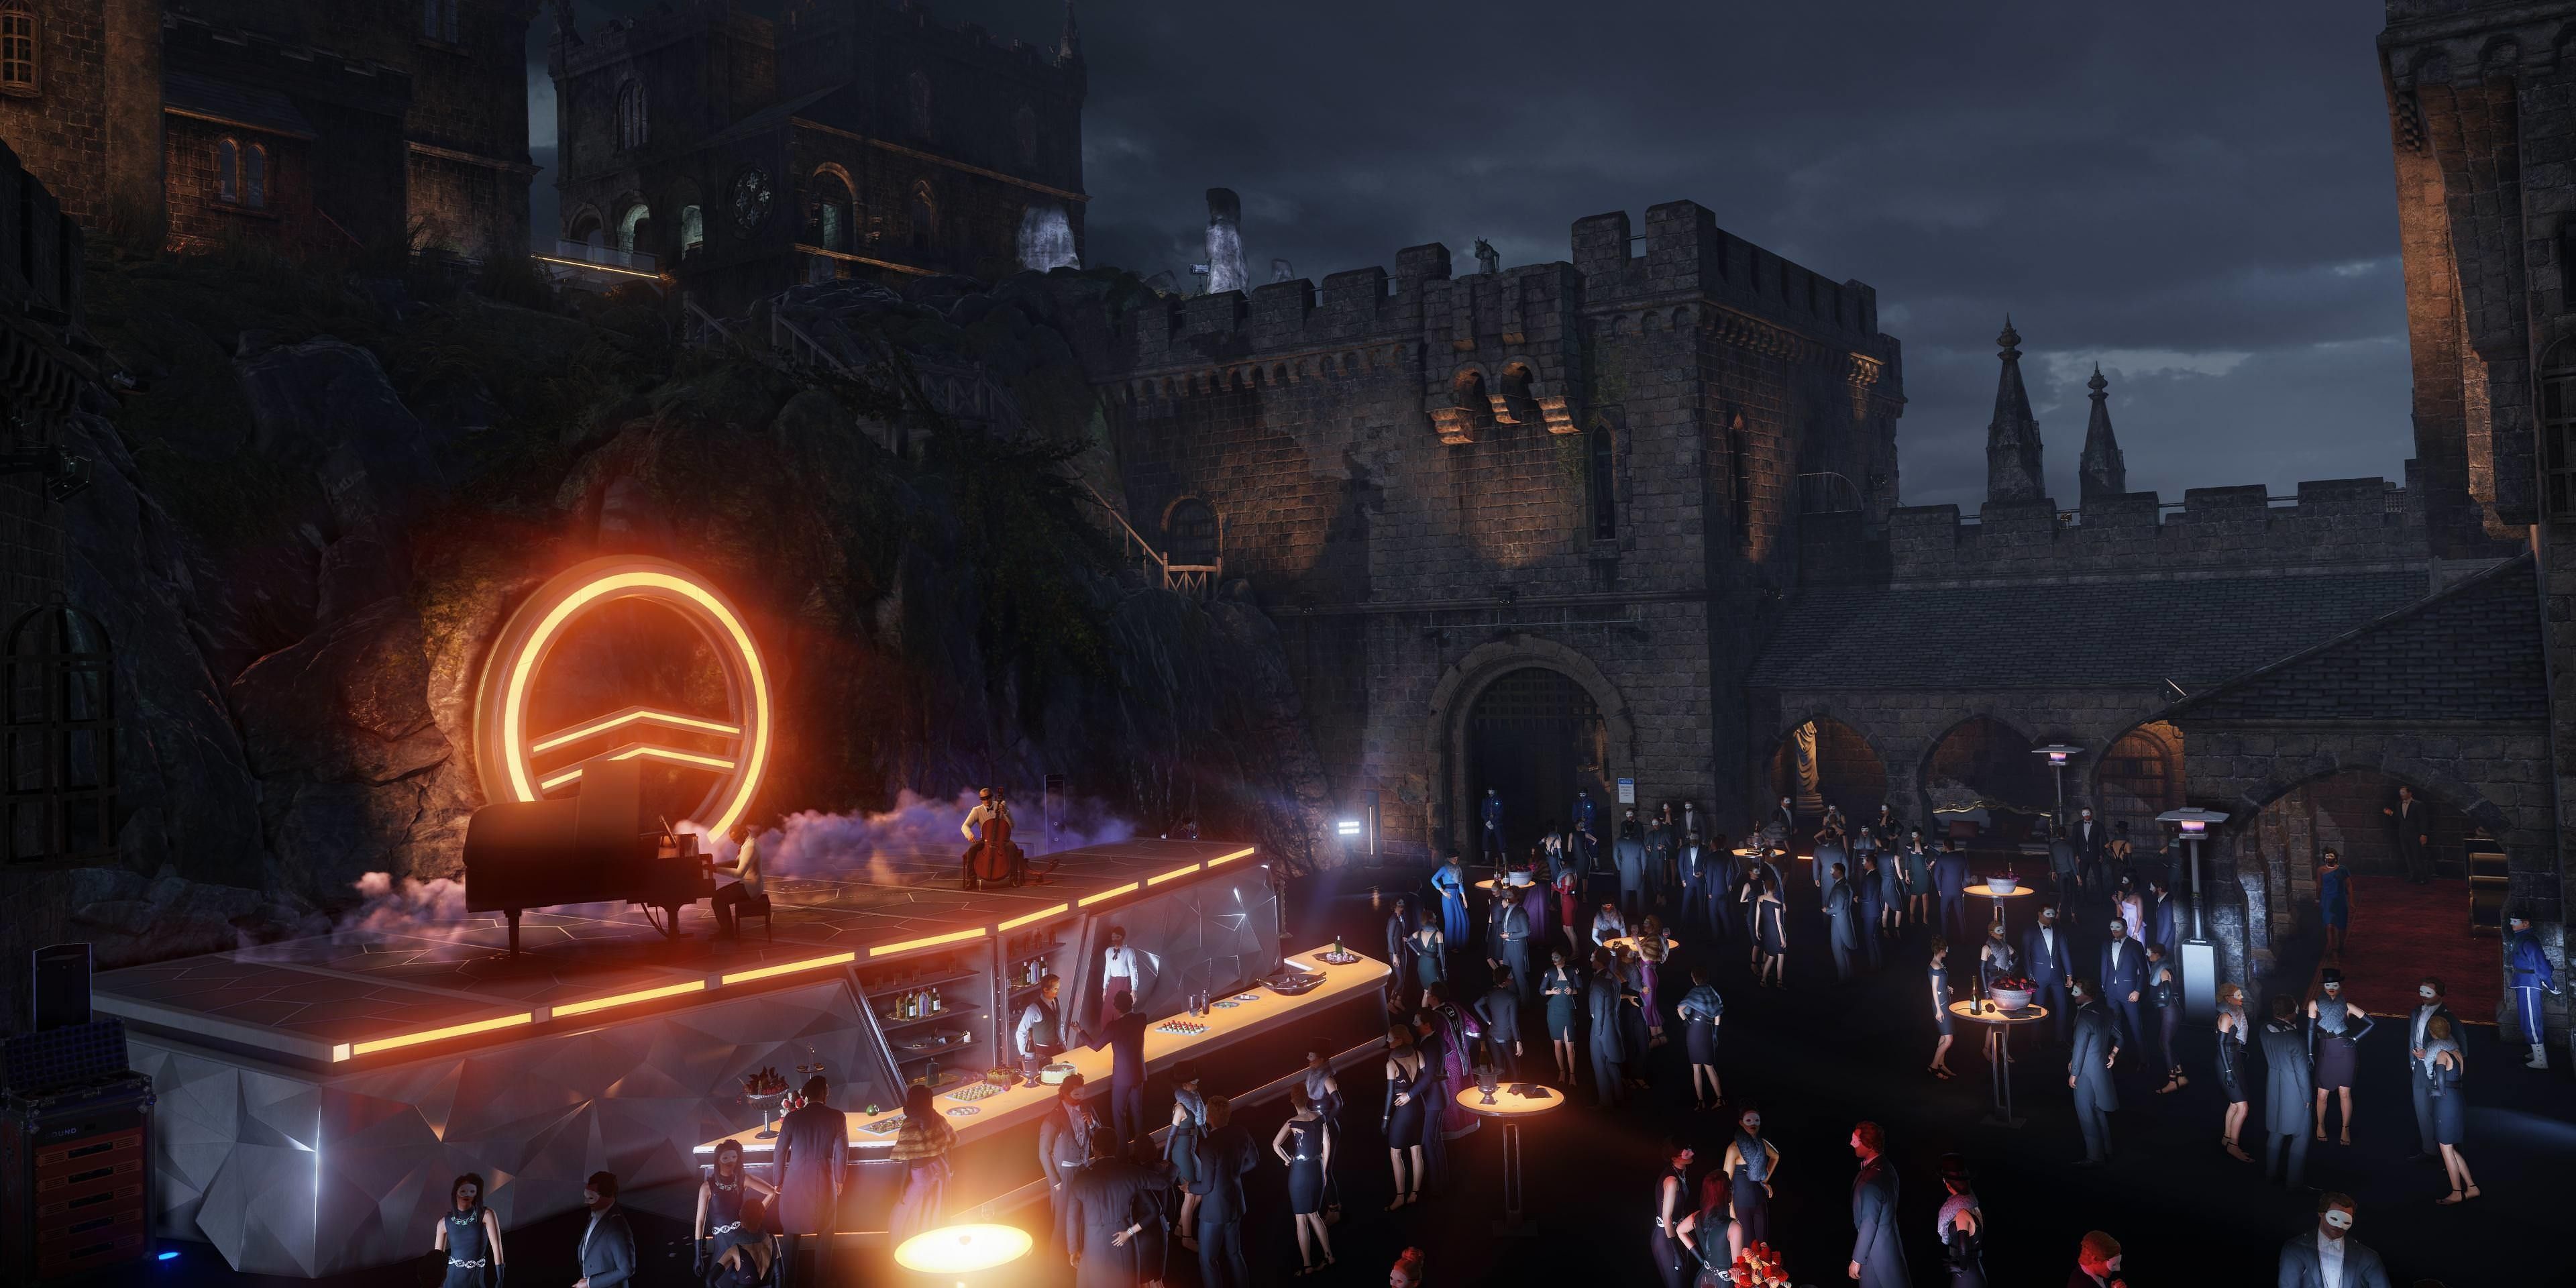 The concert stage on the Isle of Sgail from Hitman 2, with castle walls and towers behind